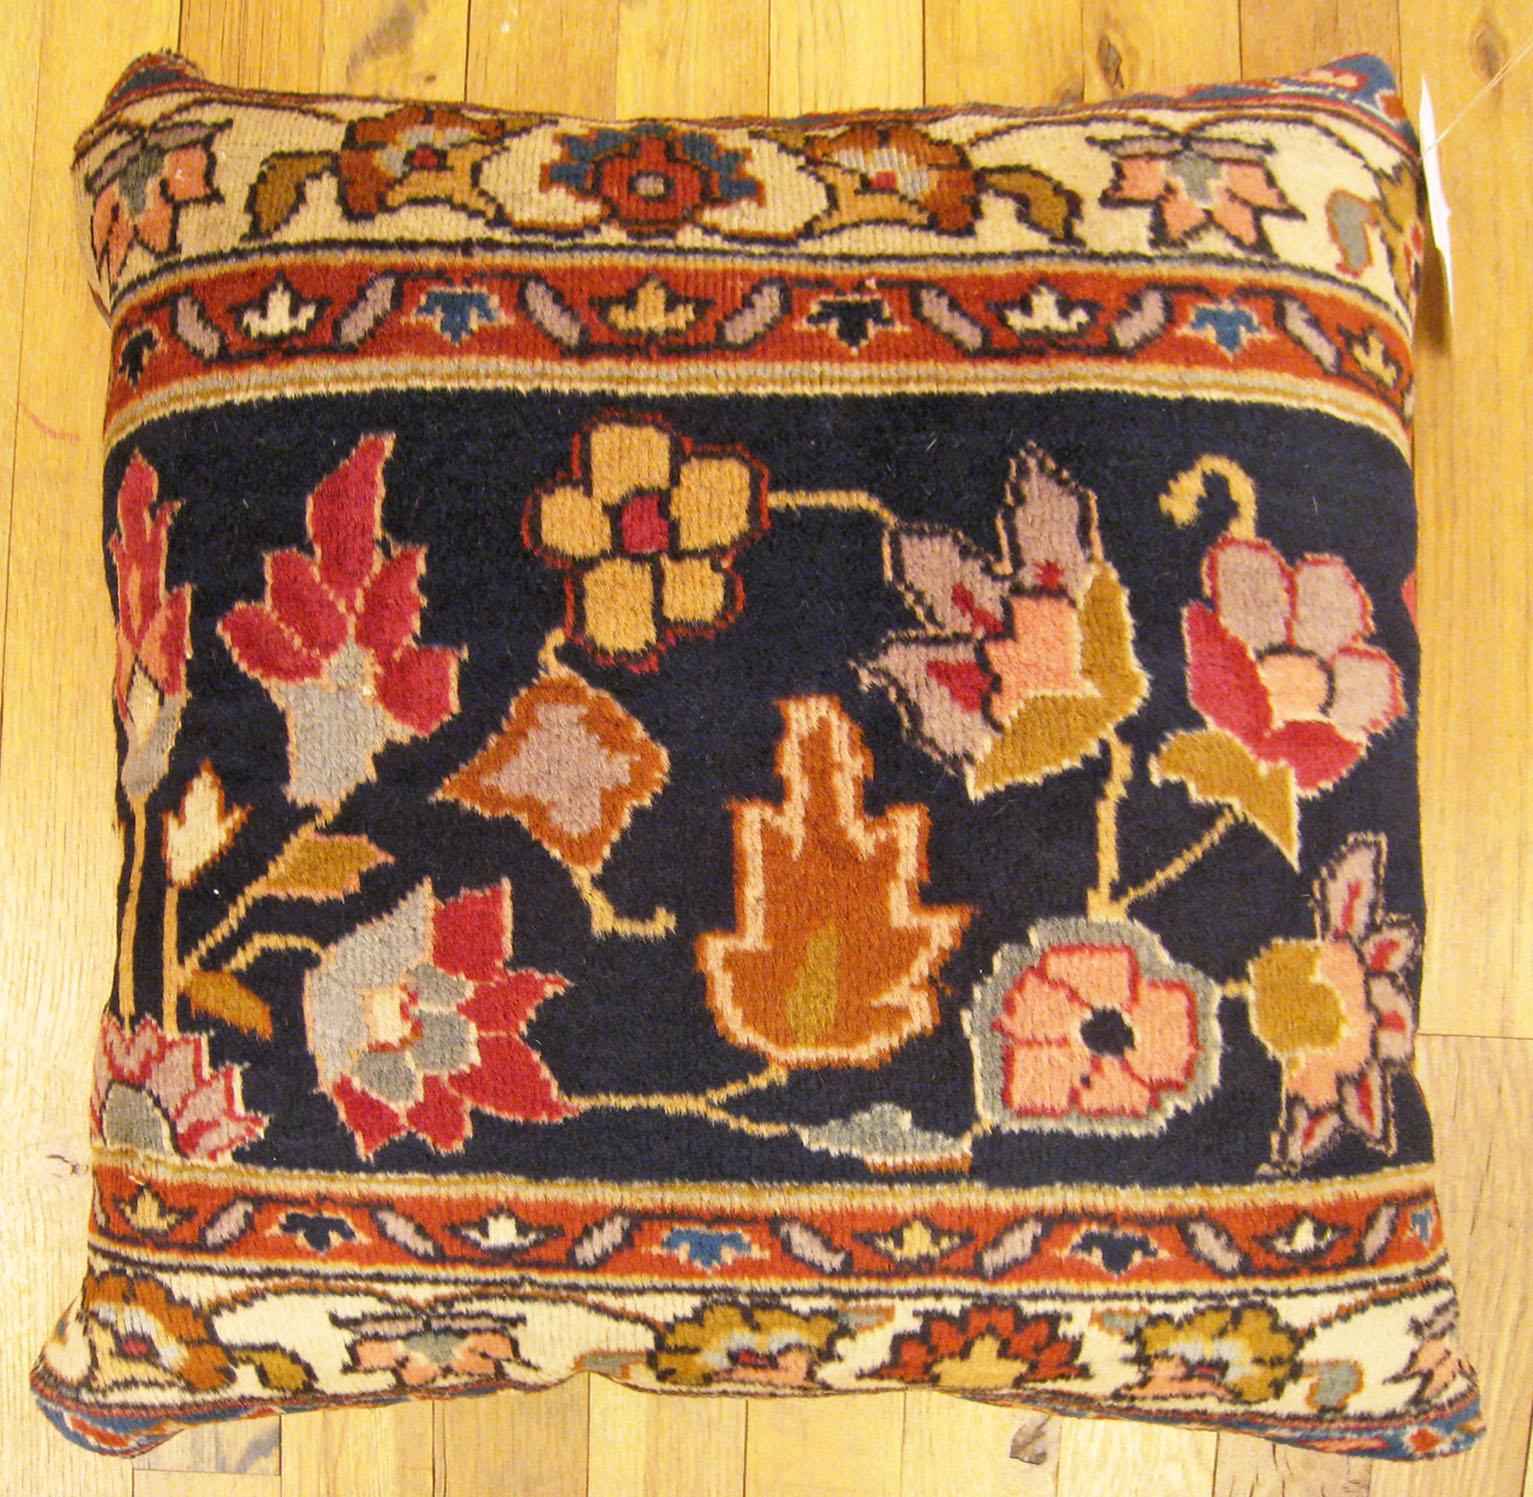 Antique Indian Agra Rug Pillow; size 1'6” x 1'6”.

An antique decorative pillow with floral elements allover a blue central field, size 1'6” x 1'6”. This lovely decorative pillow features an antique fabric of a Agra rug on front which is